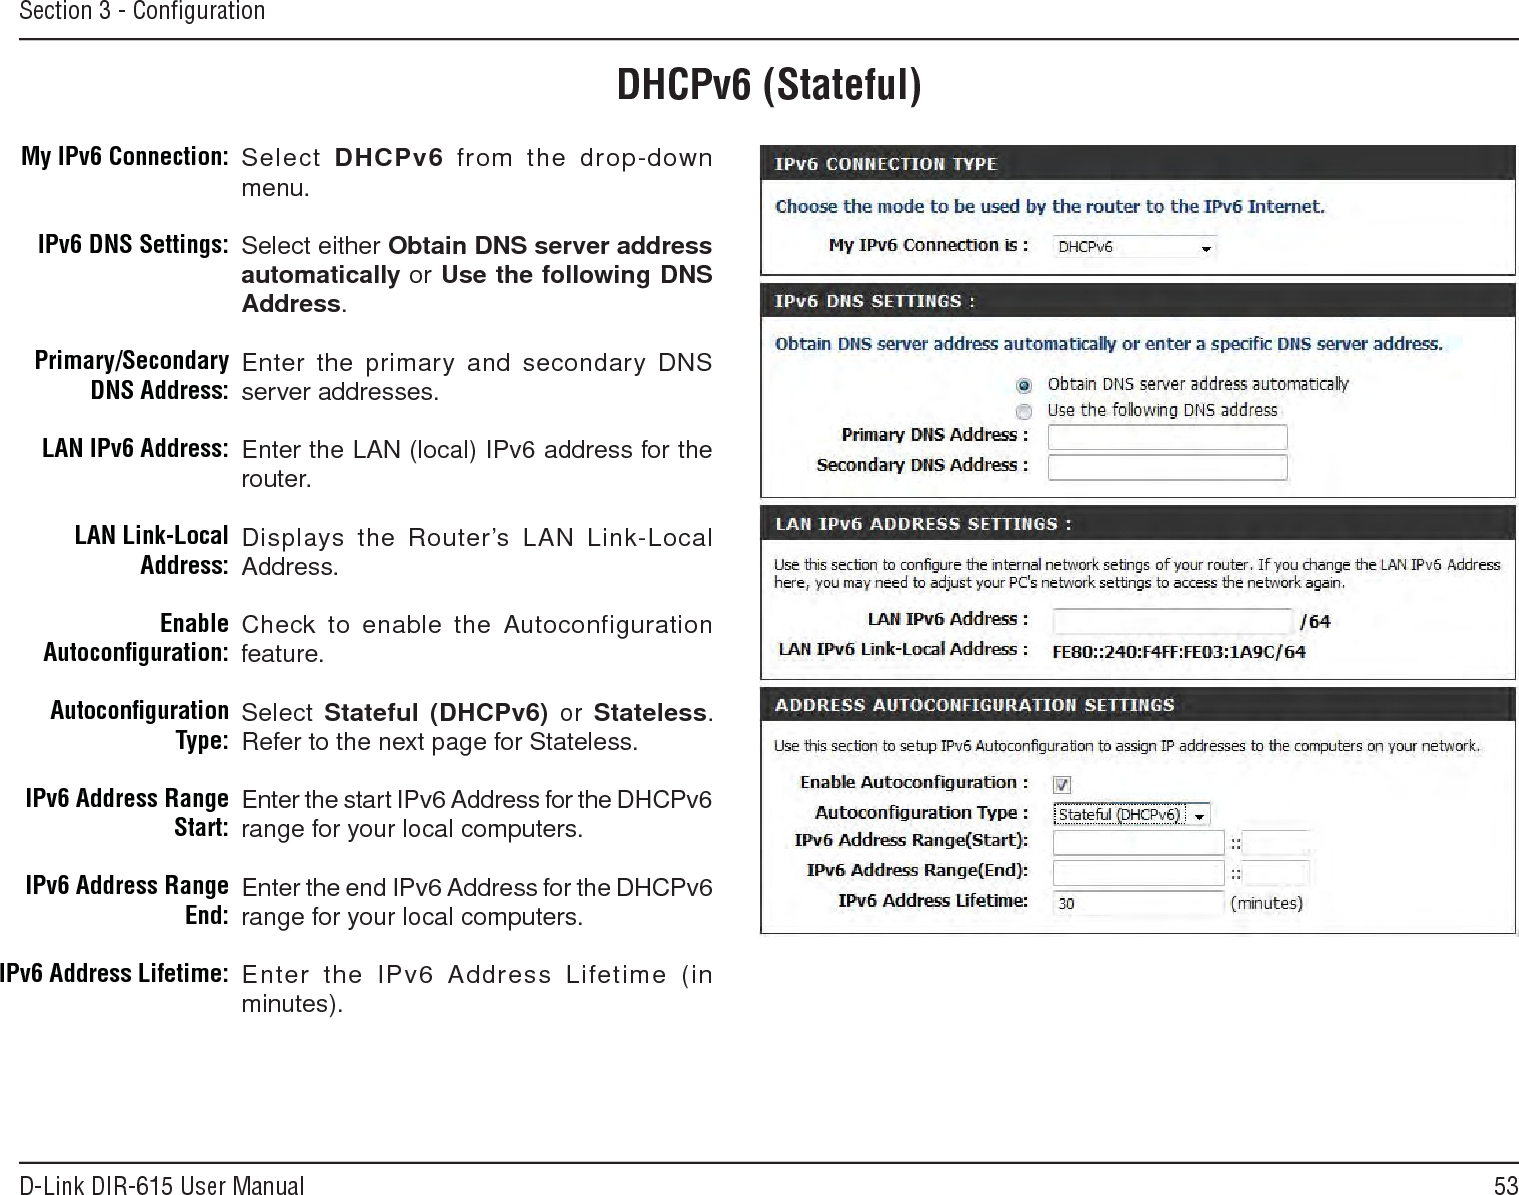 53D-Link DIR-615 User ManualSection 3 - ConﬁgurationDHCPv6 (Stateful)Select DHCPv6  from the drop-down menu.Select either Obtain.DNS.server.address.automatically or Use.the.following.DNS.Address.Enter the primary and secondary DNS server addresses. Enter the LAN (local) IPv6 address for the router. Displays the Router’s LAN Link-Local Address.Check to enable the  Autoconfiguration feature.Select Stateful.(DHCPv6)  or  Stateless. Refer to the next page for Stateless.Enter the start IPv6 Address for the DHCPv6 range for your local computers.Enter the end IPv6 Address for the DHCPv6 range for your local computers.Enter  the  IPv6 Address  Lifetime  (in minutes).My IPv6 Connection:IPv6 DNS Settings:Primary/Secondary DNS Address:LAN IPv6 Address:LAN Link-Local Address:Enable Autoconﬁguration:Autoconﬁguration Type:IPv6 Address Range Start:IPv6 Address Range End:IPv6 Address Lifetime: